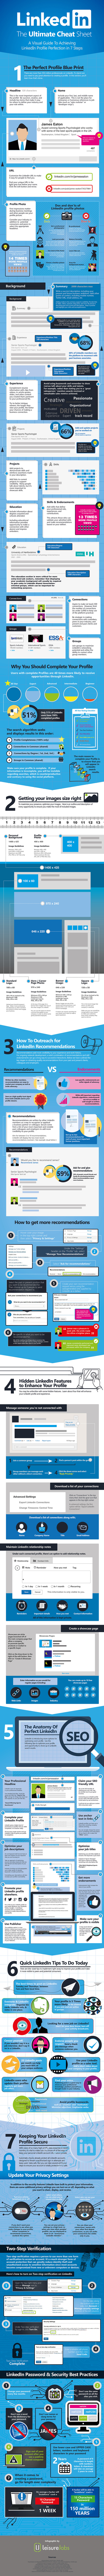 Linkedin The Ultimate Cheat Sheet Infographic